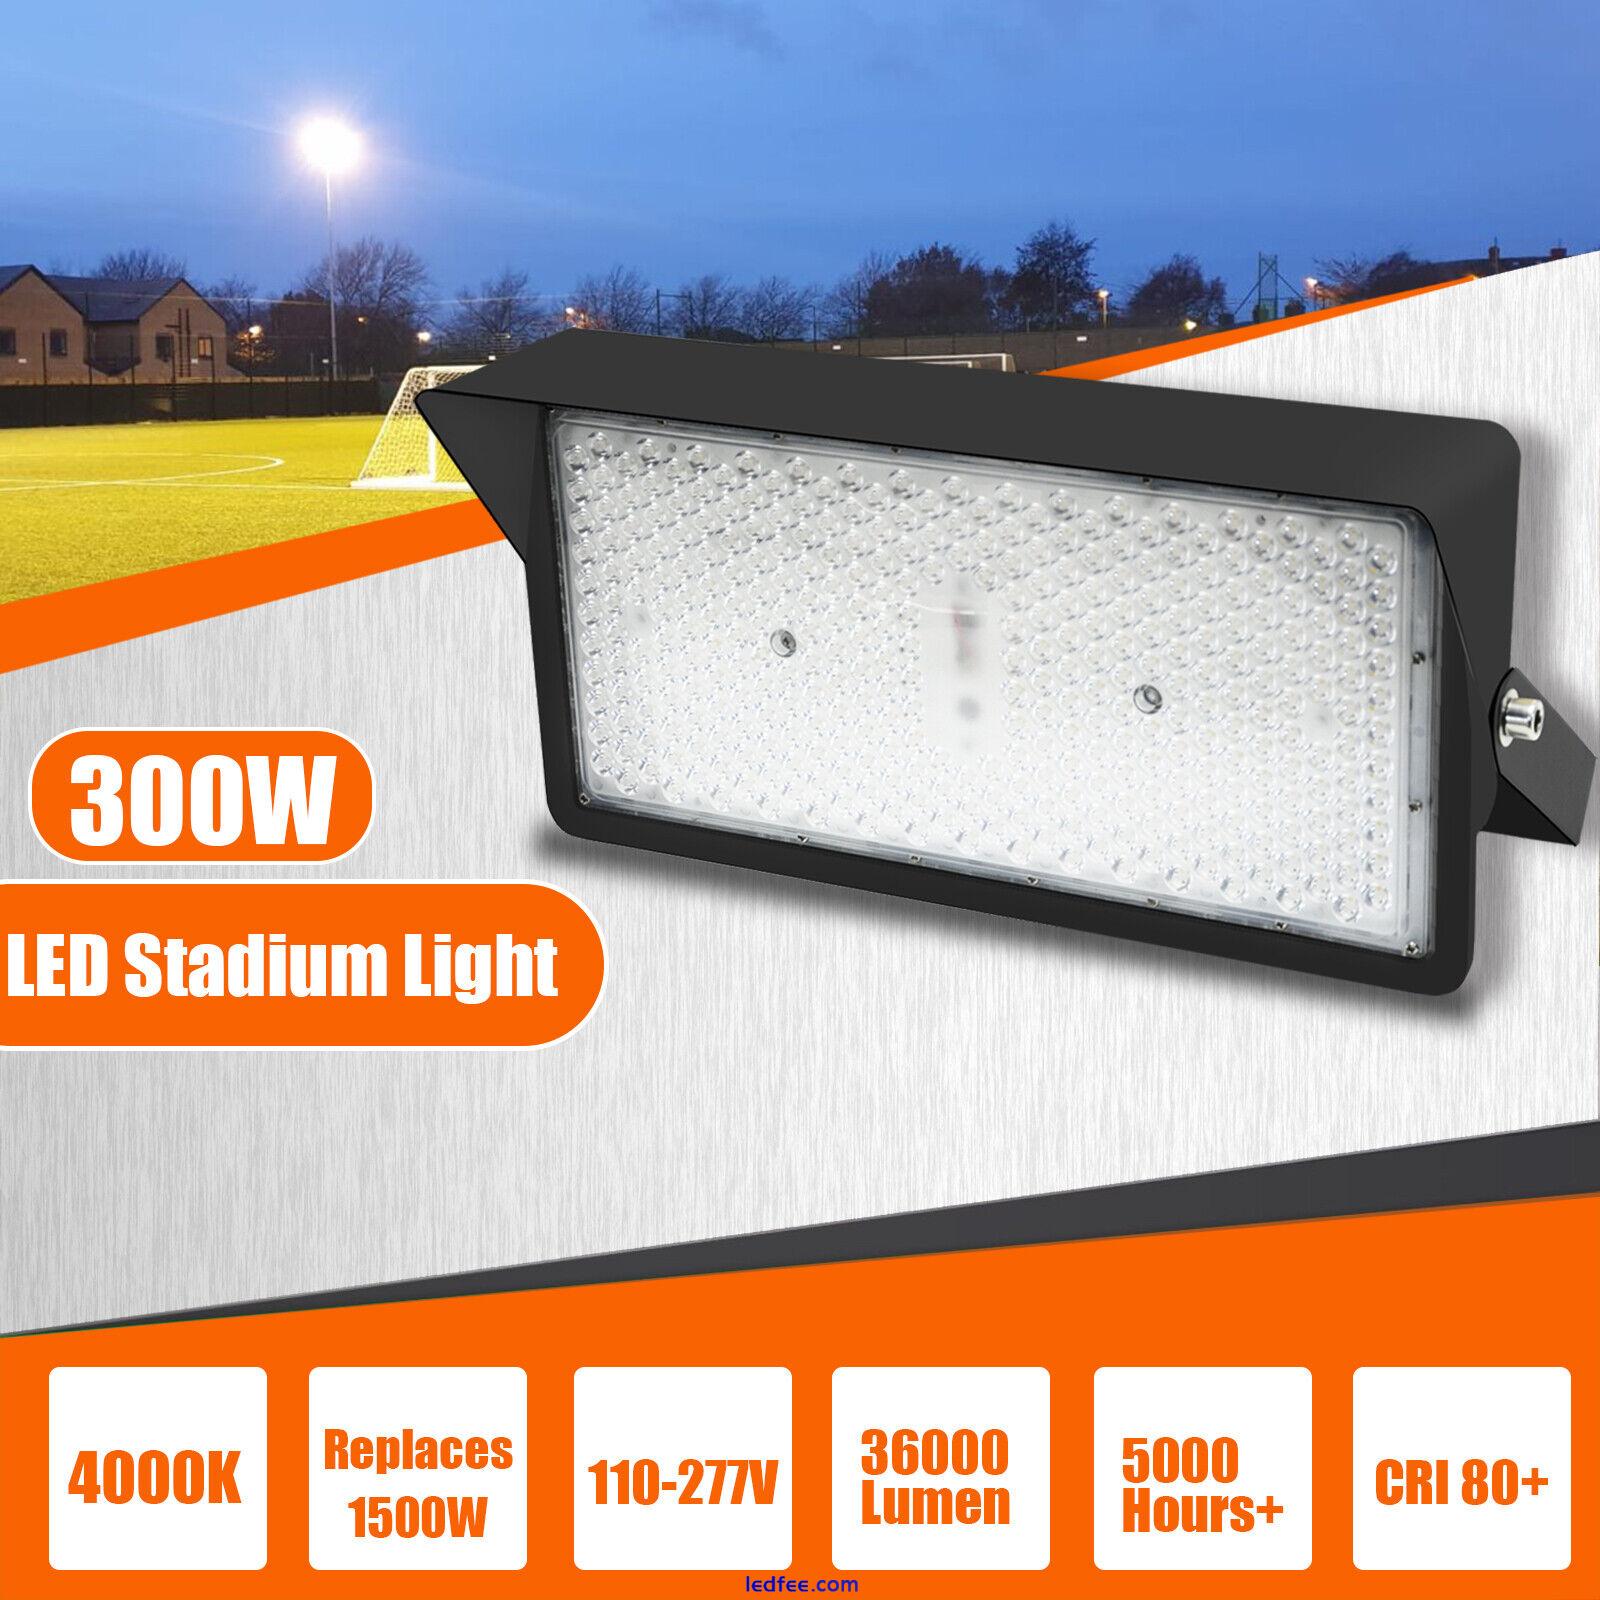 LED Flood Lights Outdoor 300Watt Commercial Lighting with Dusk to Dawn Photocell 2 